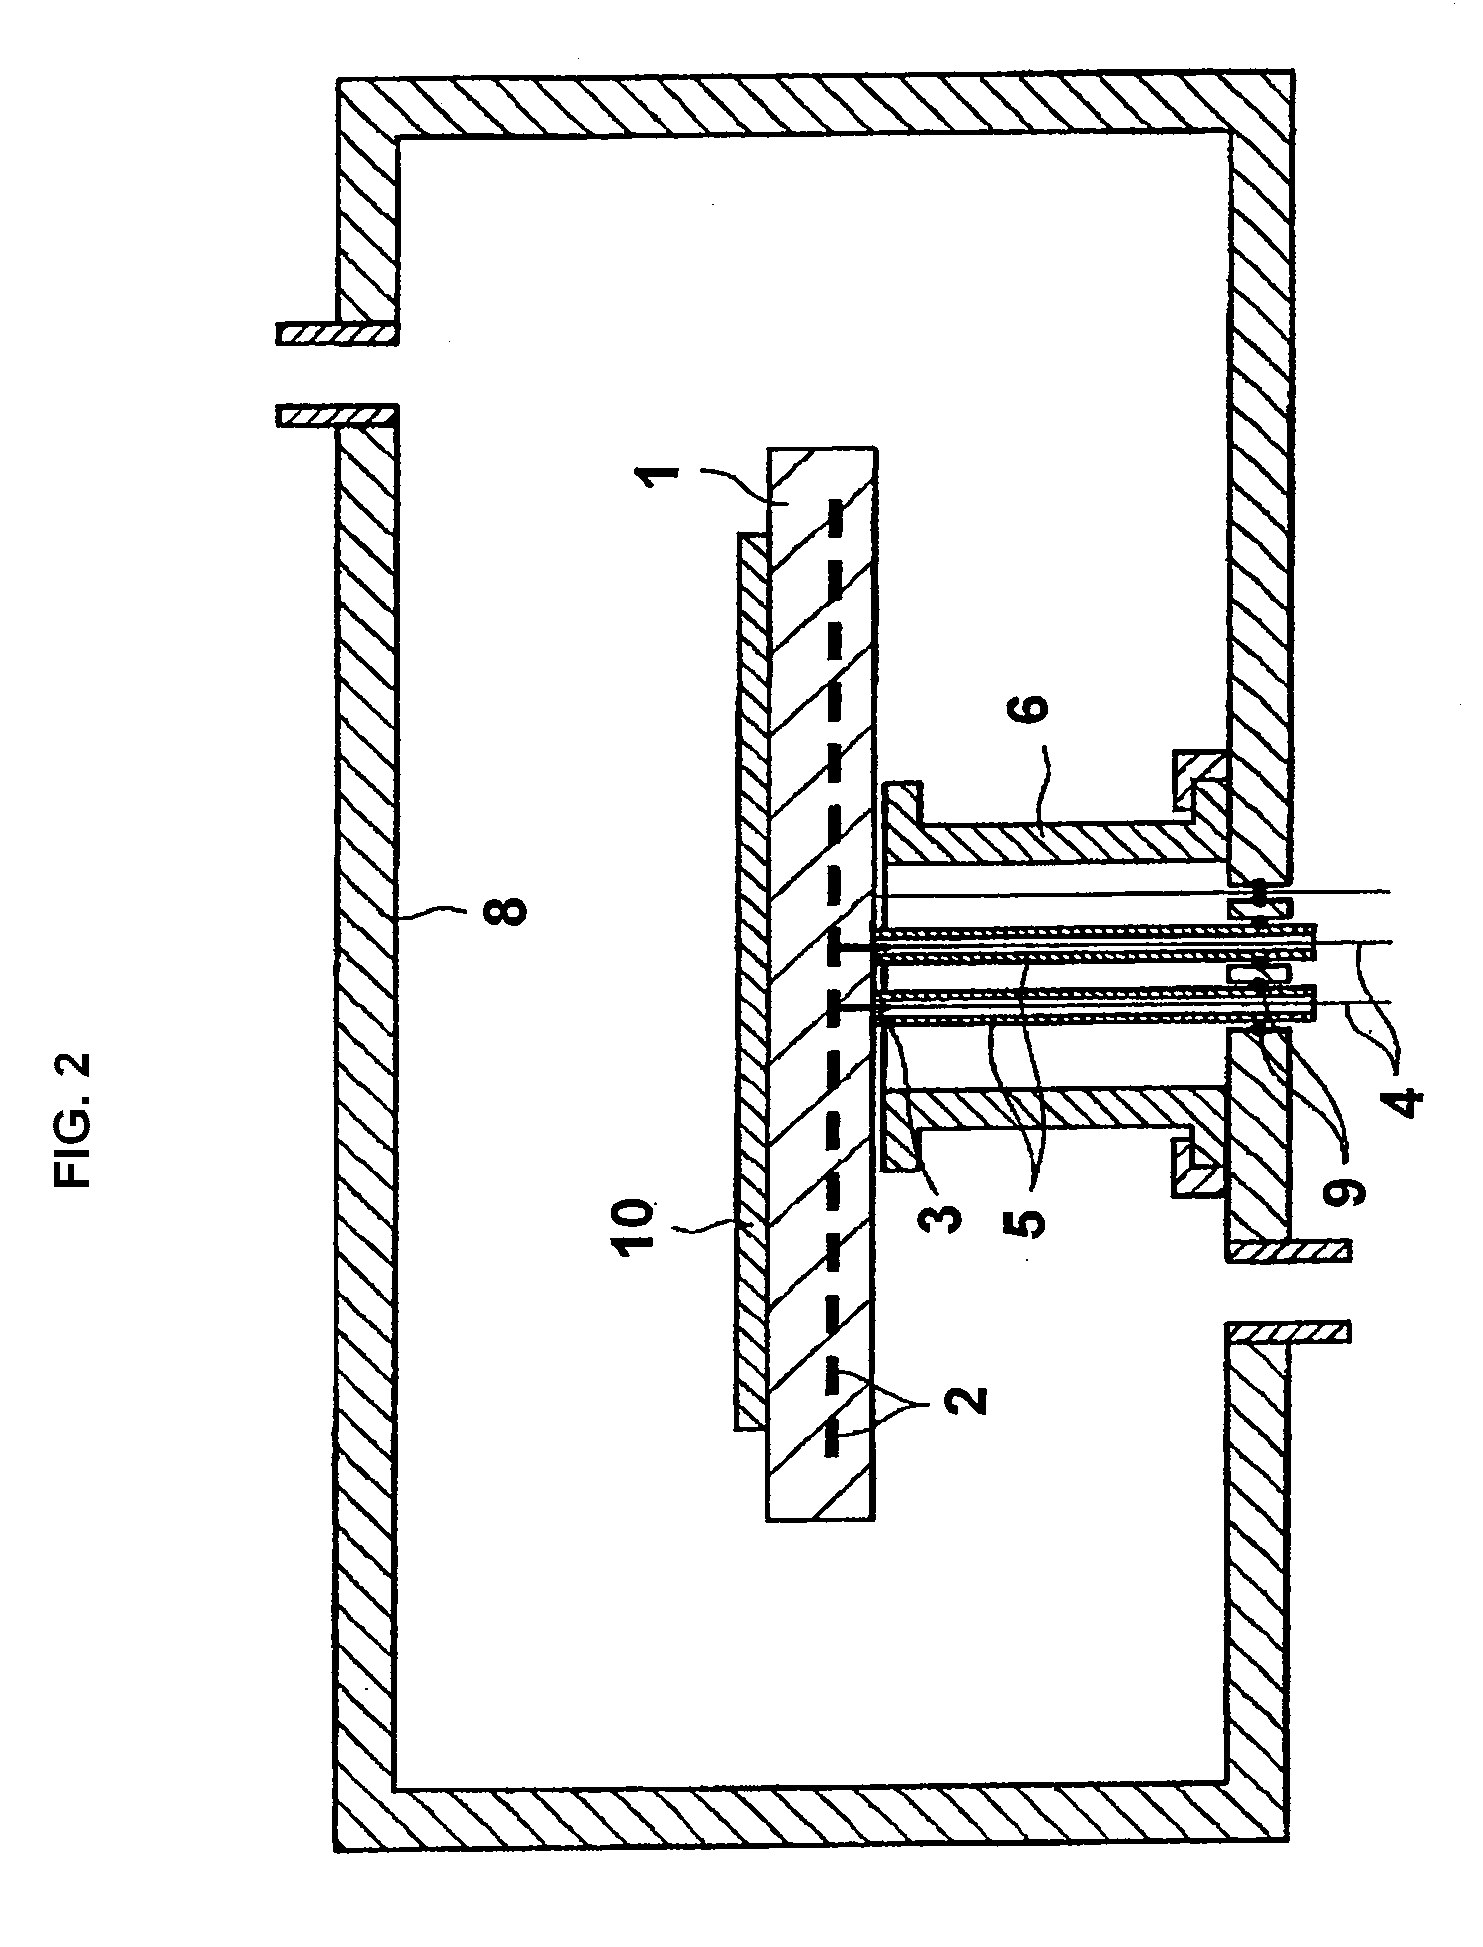 Holder for semiconductor manufacturing equipment